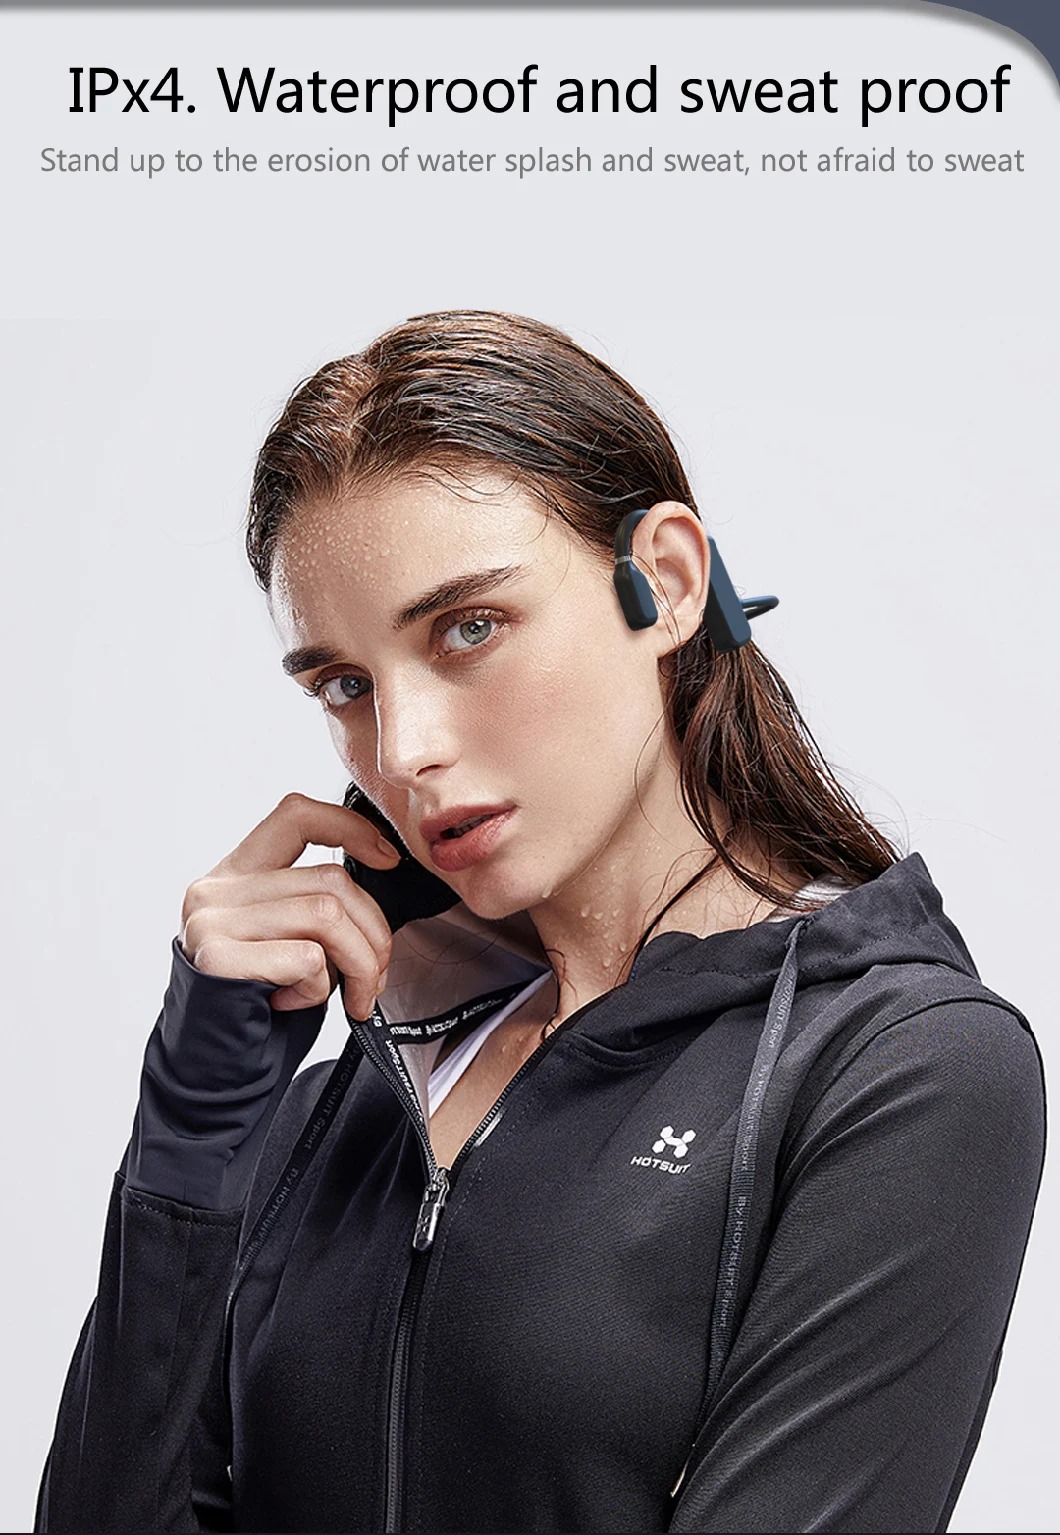 Wireless Bone Conduction Headphone for People with Hearing Deficiencies